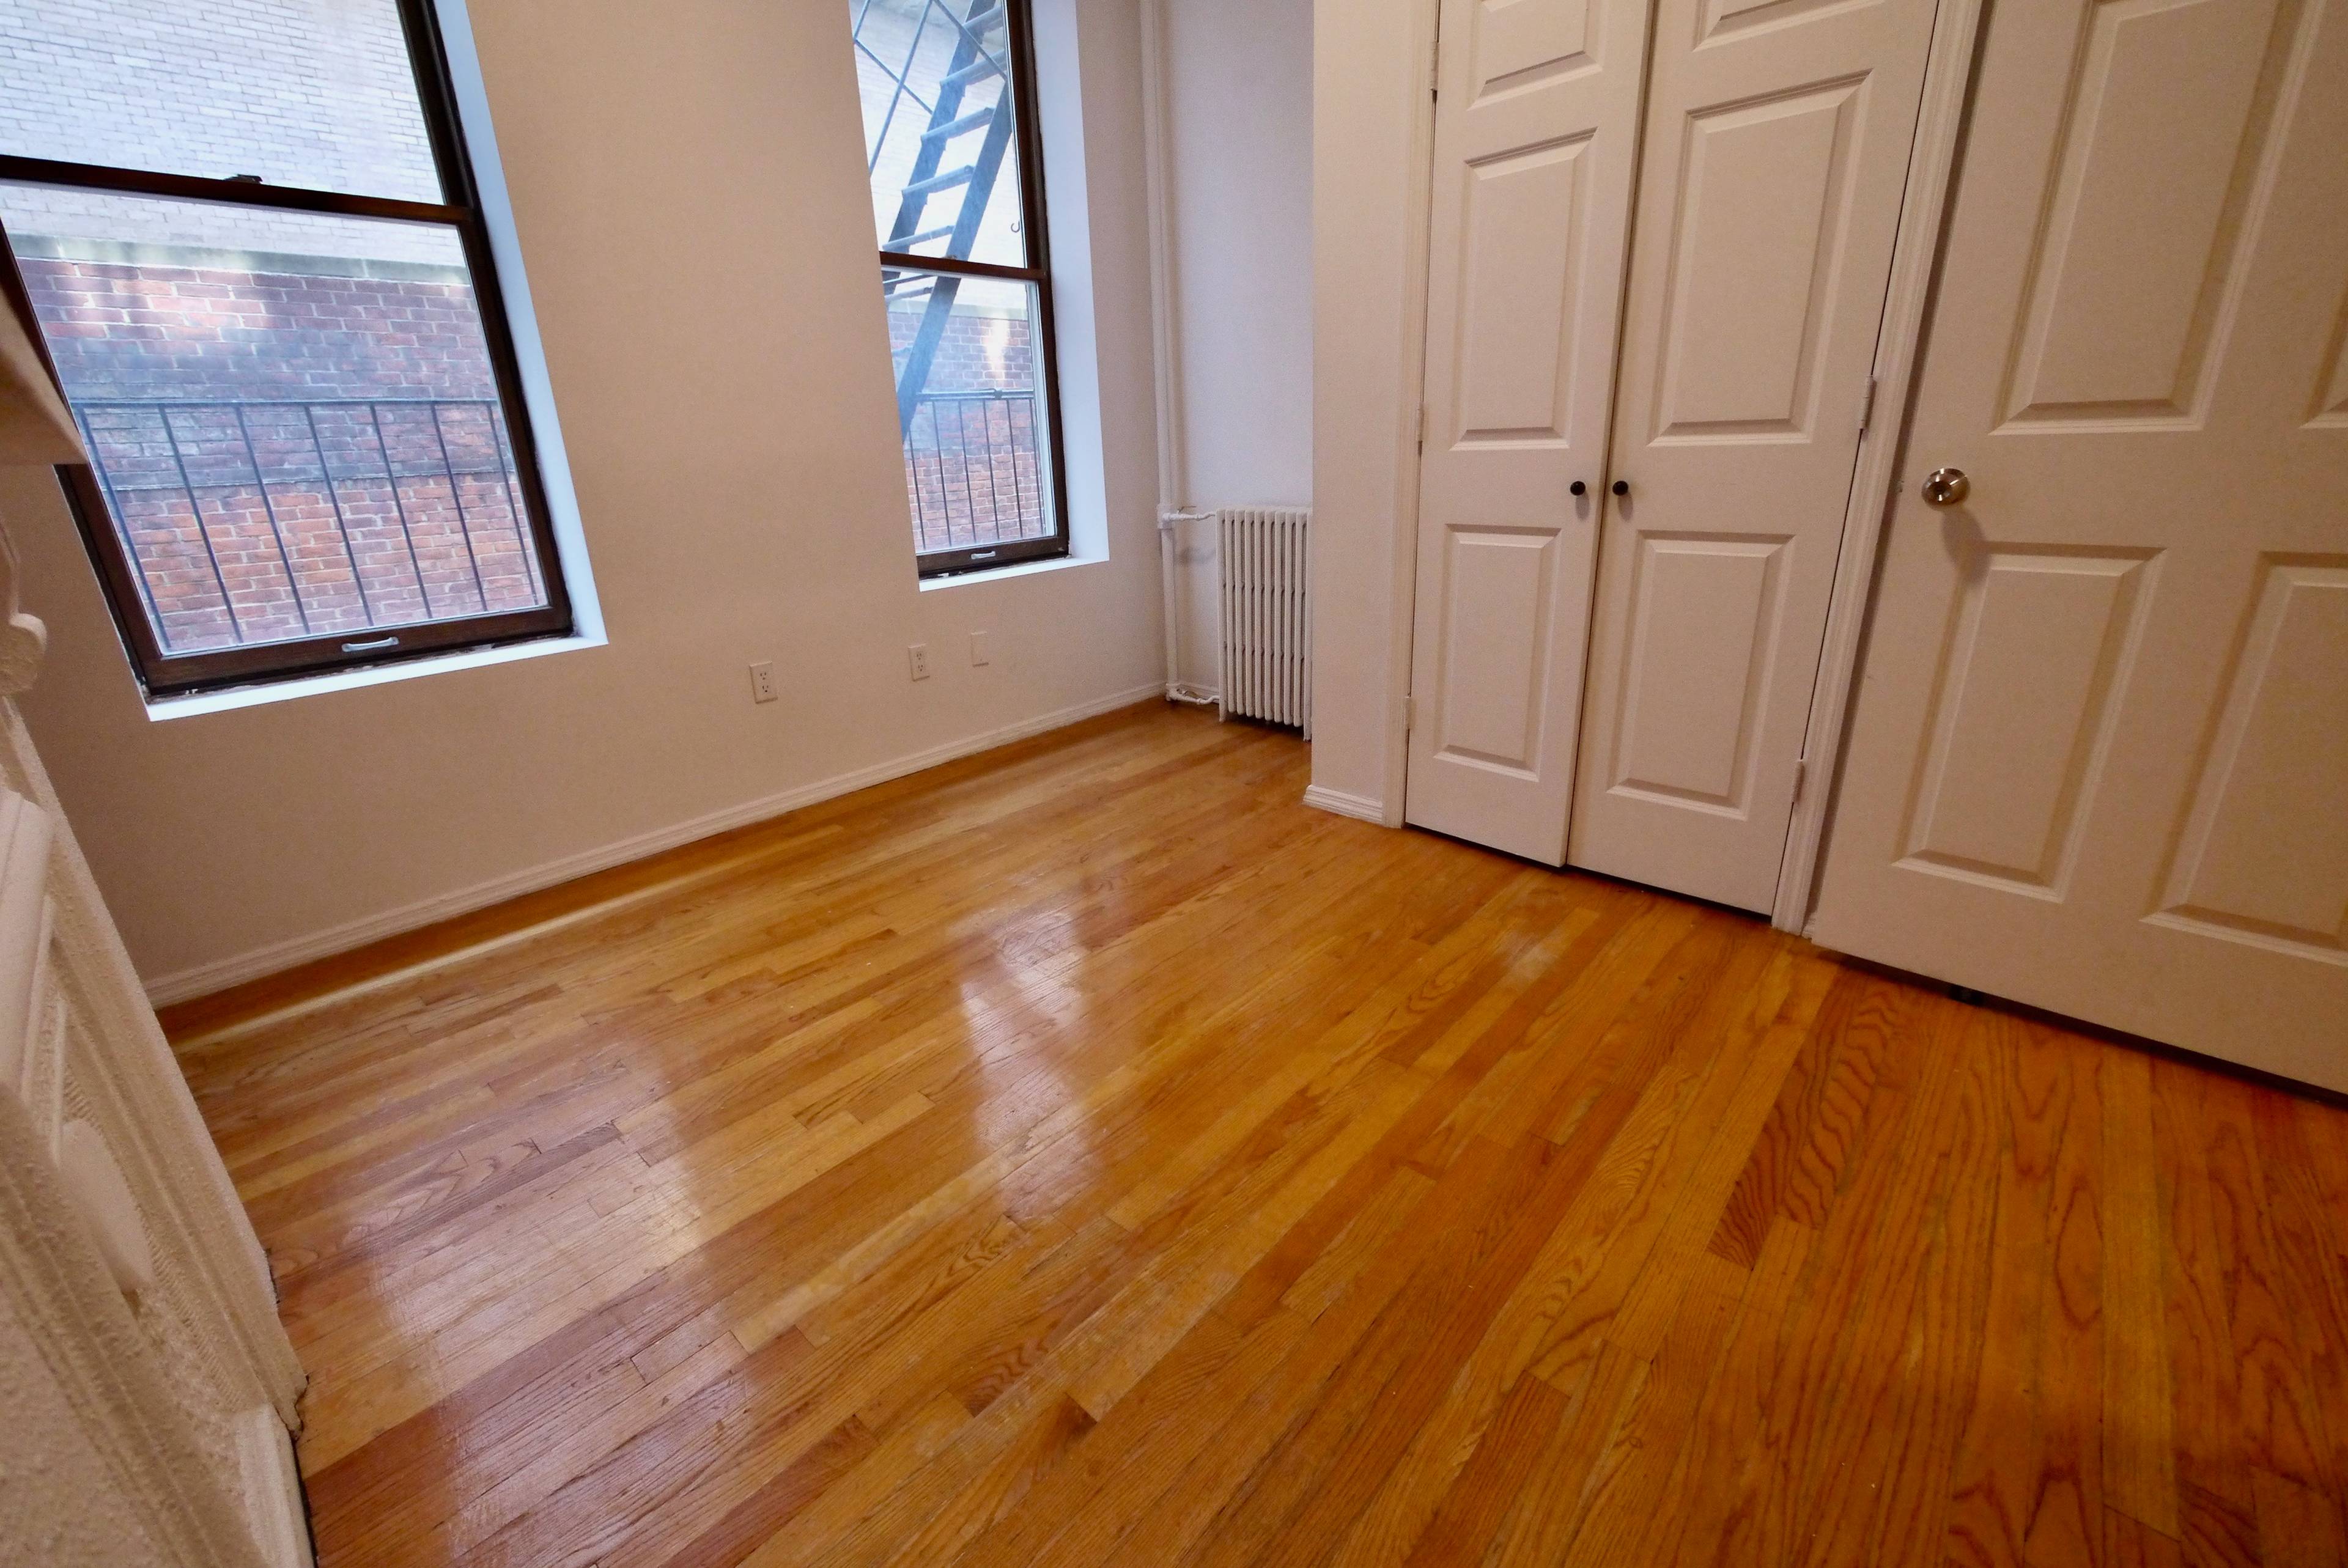 Quiet One bedroom apartment in a prime Gramercy park location, just off of third avenue.